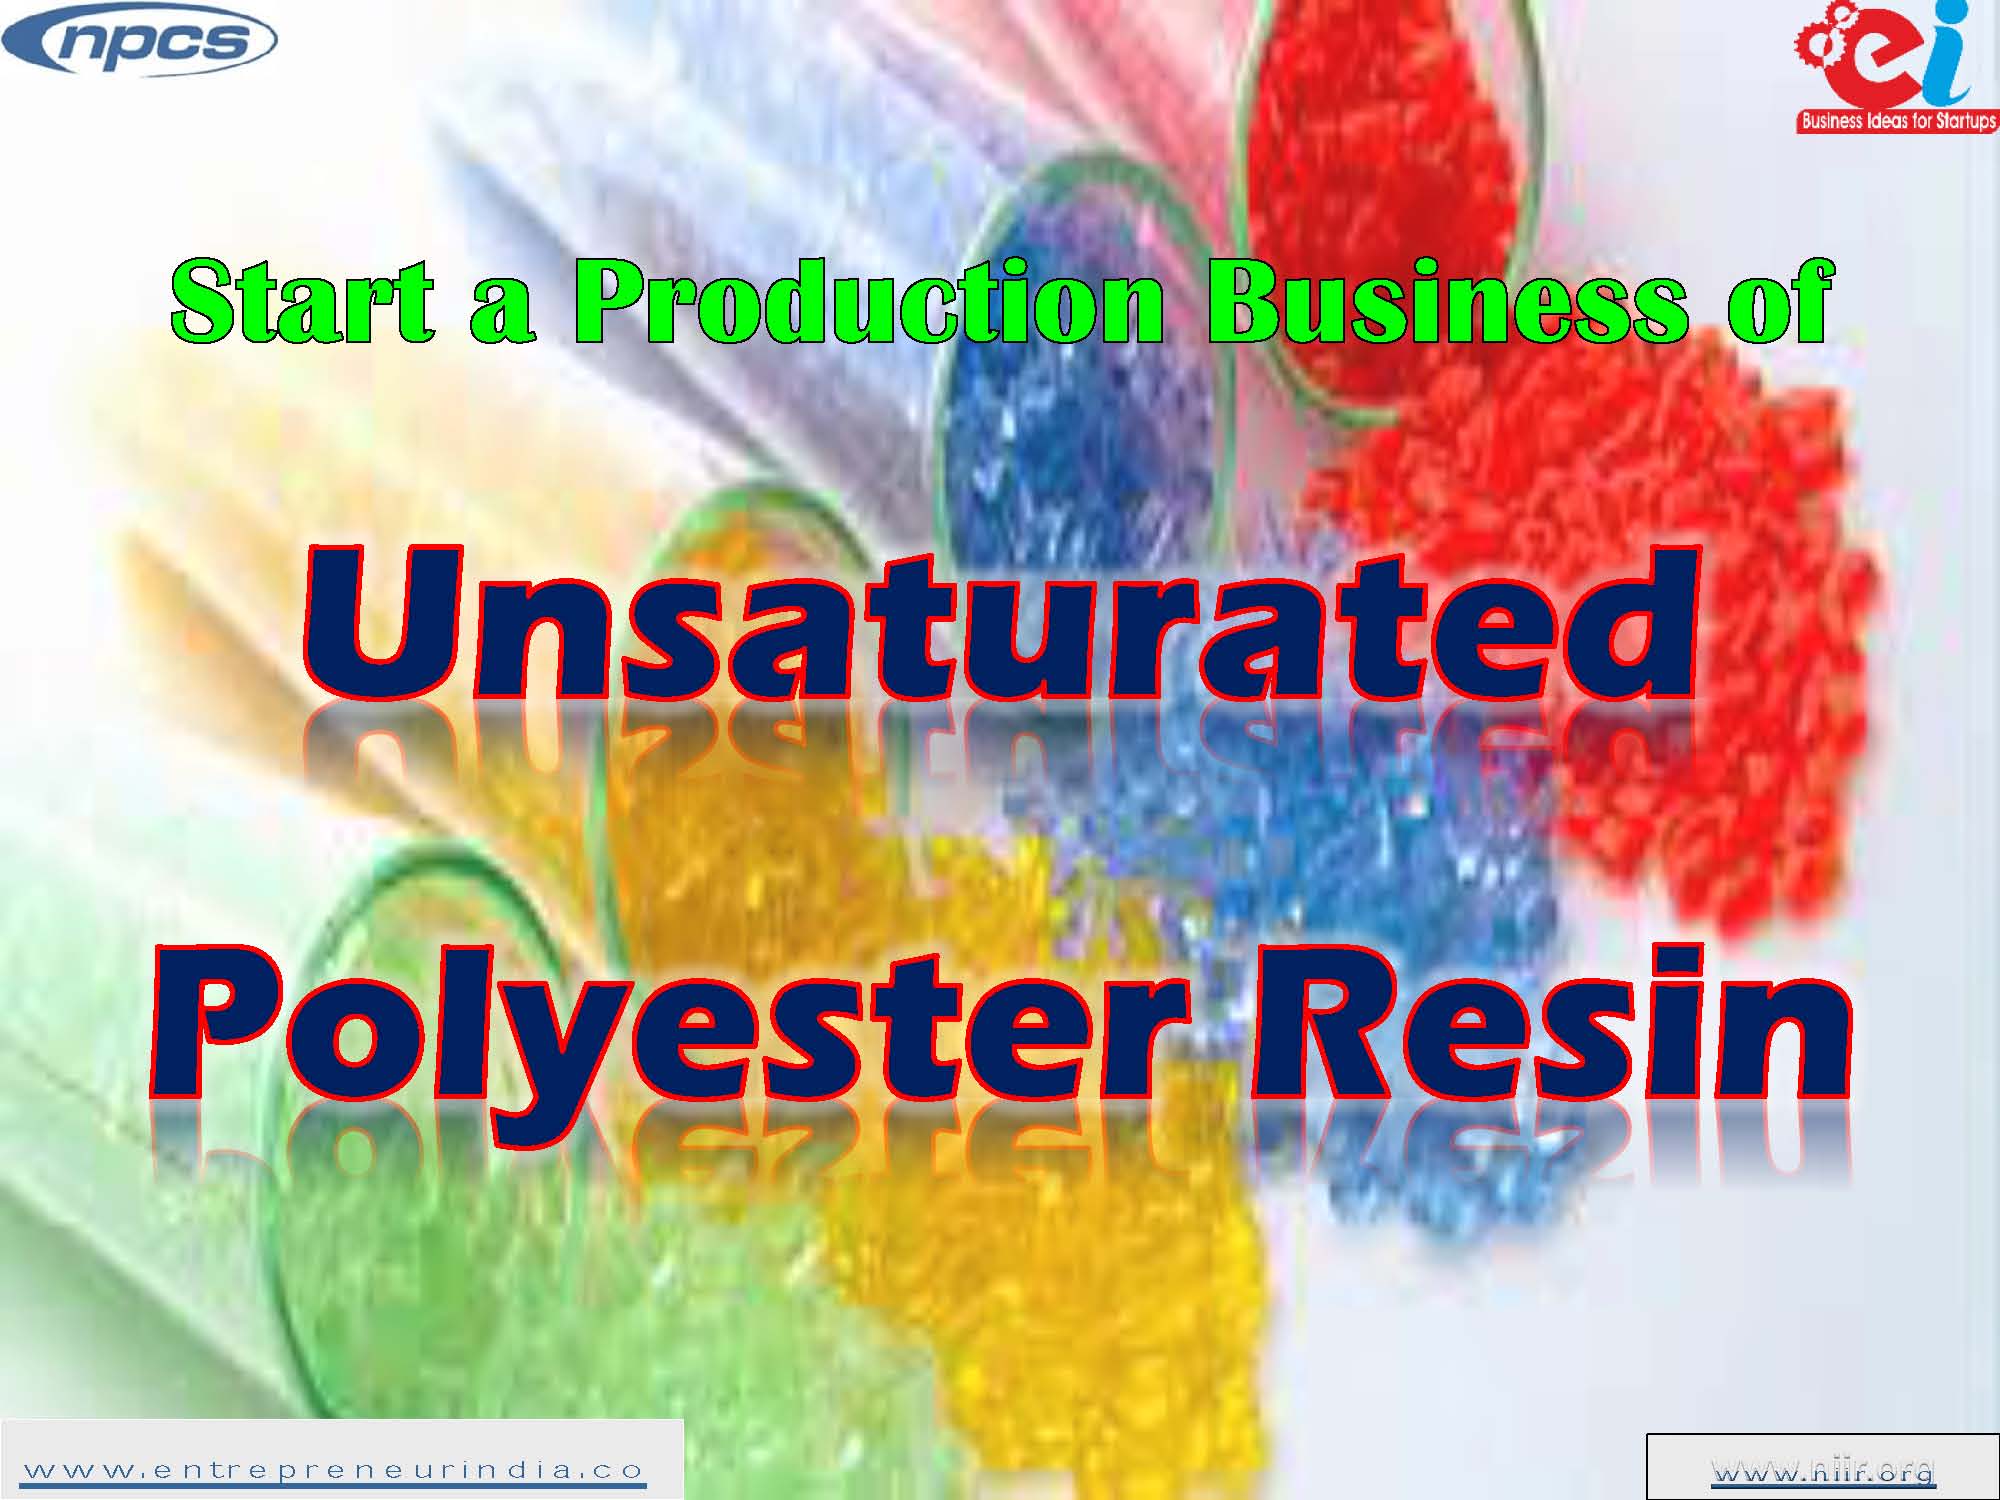 Start Manufacturing Business of Unsaturated Polyester Resin